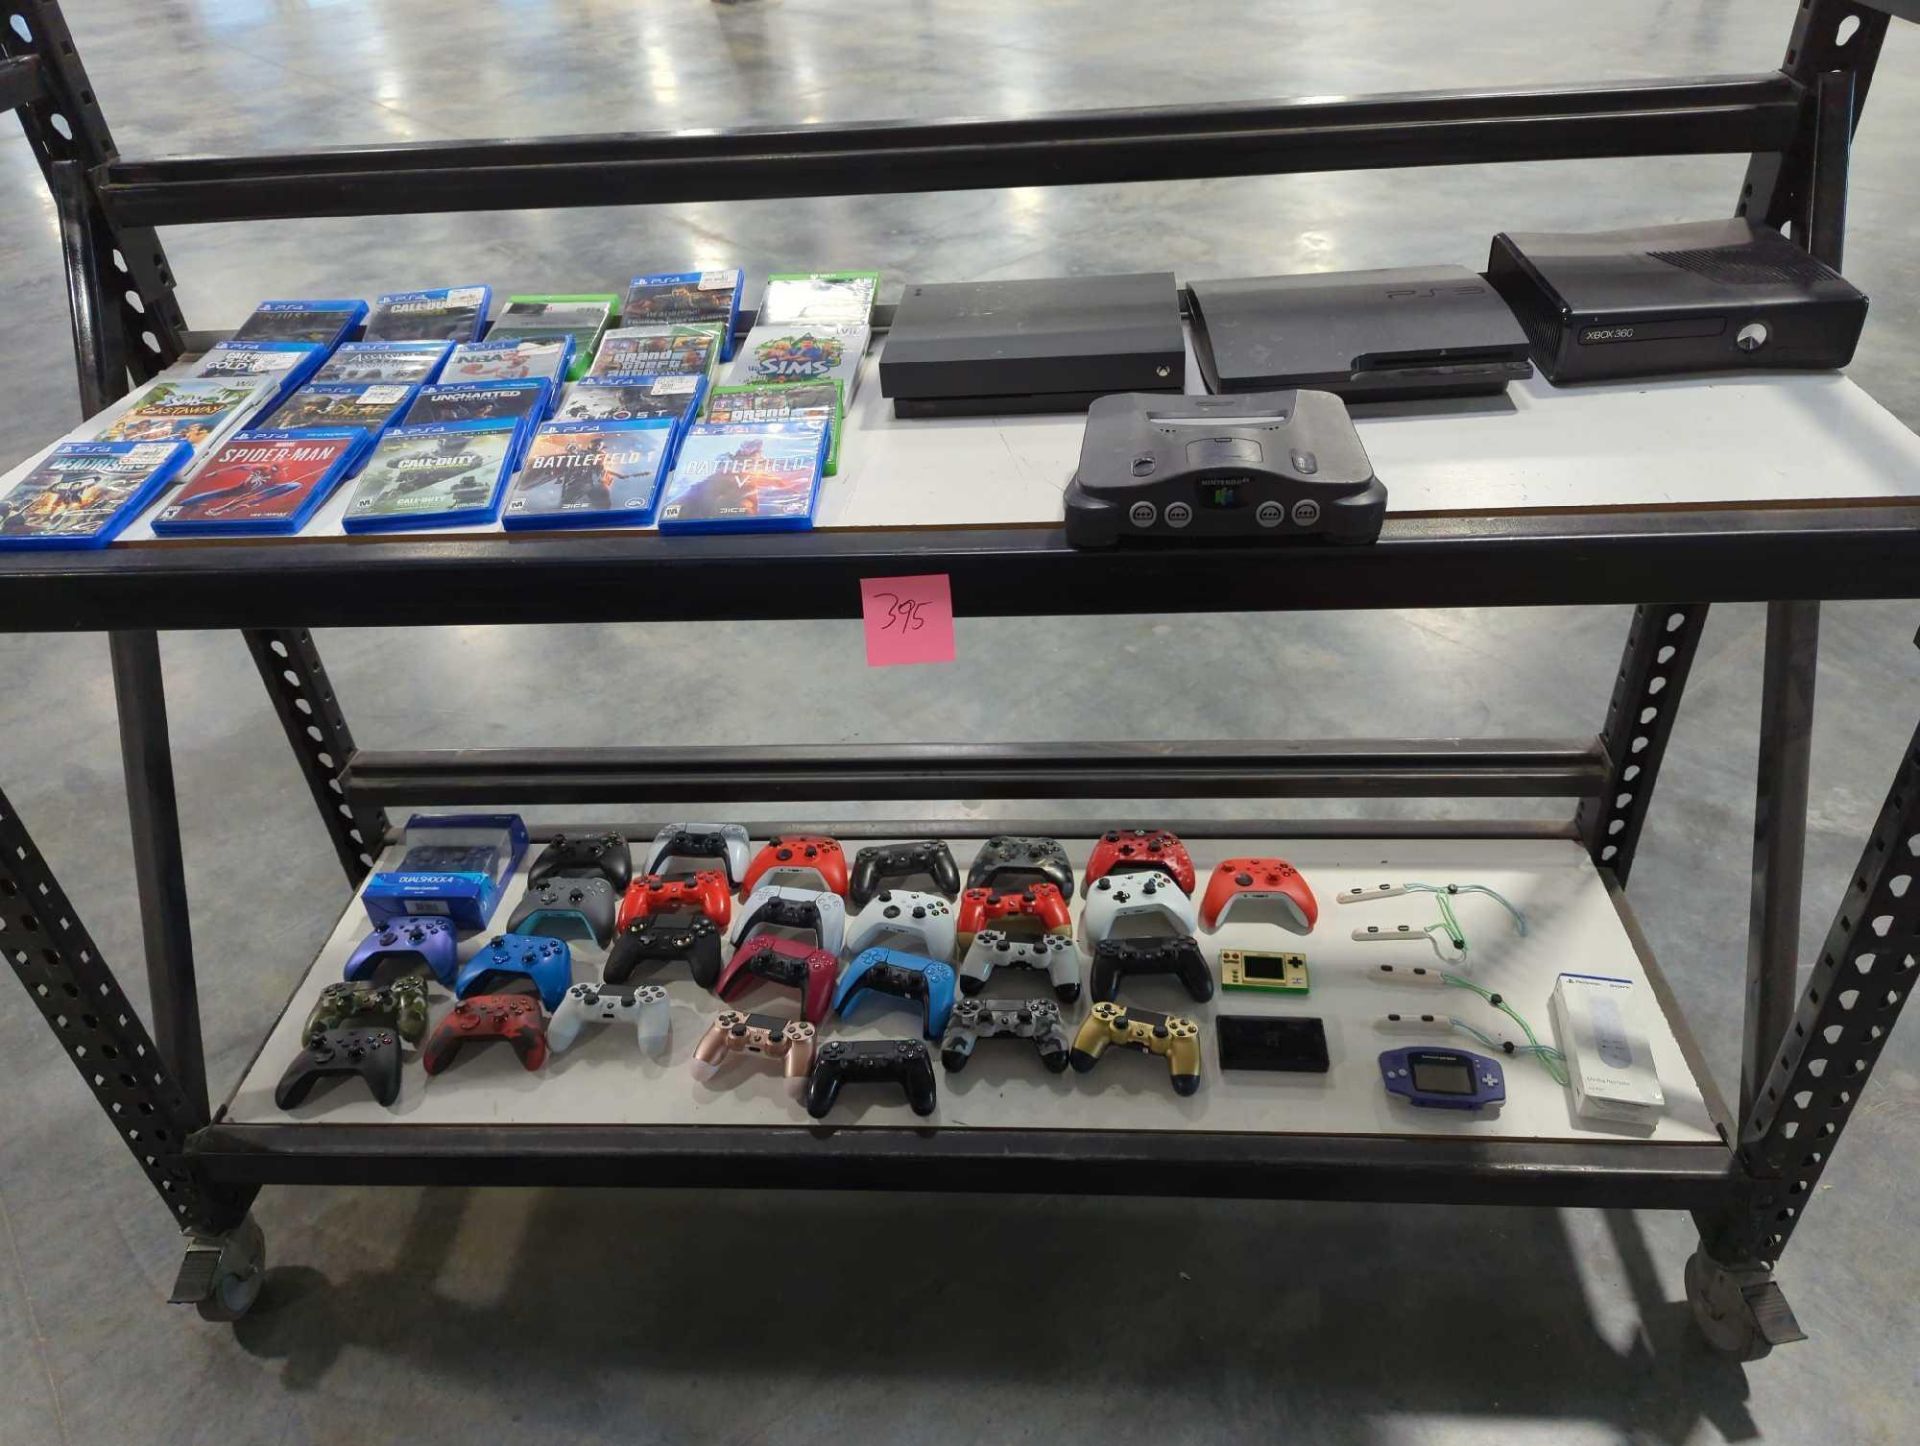 Gaming consoles, games and controllers